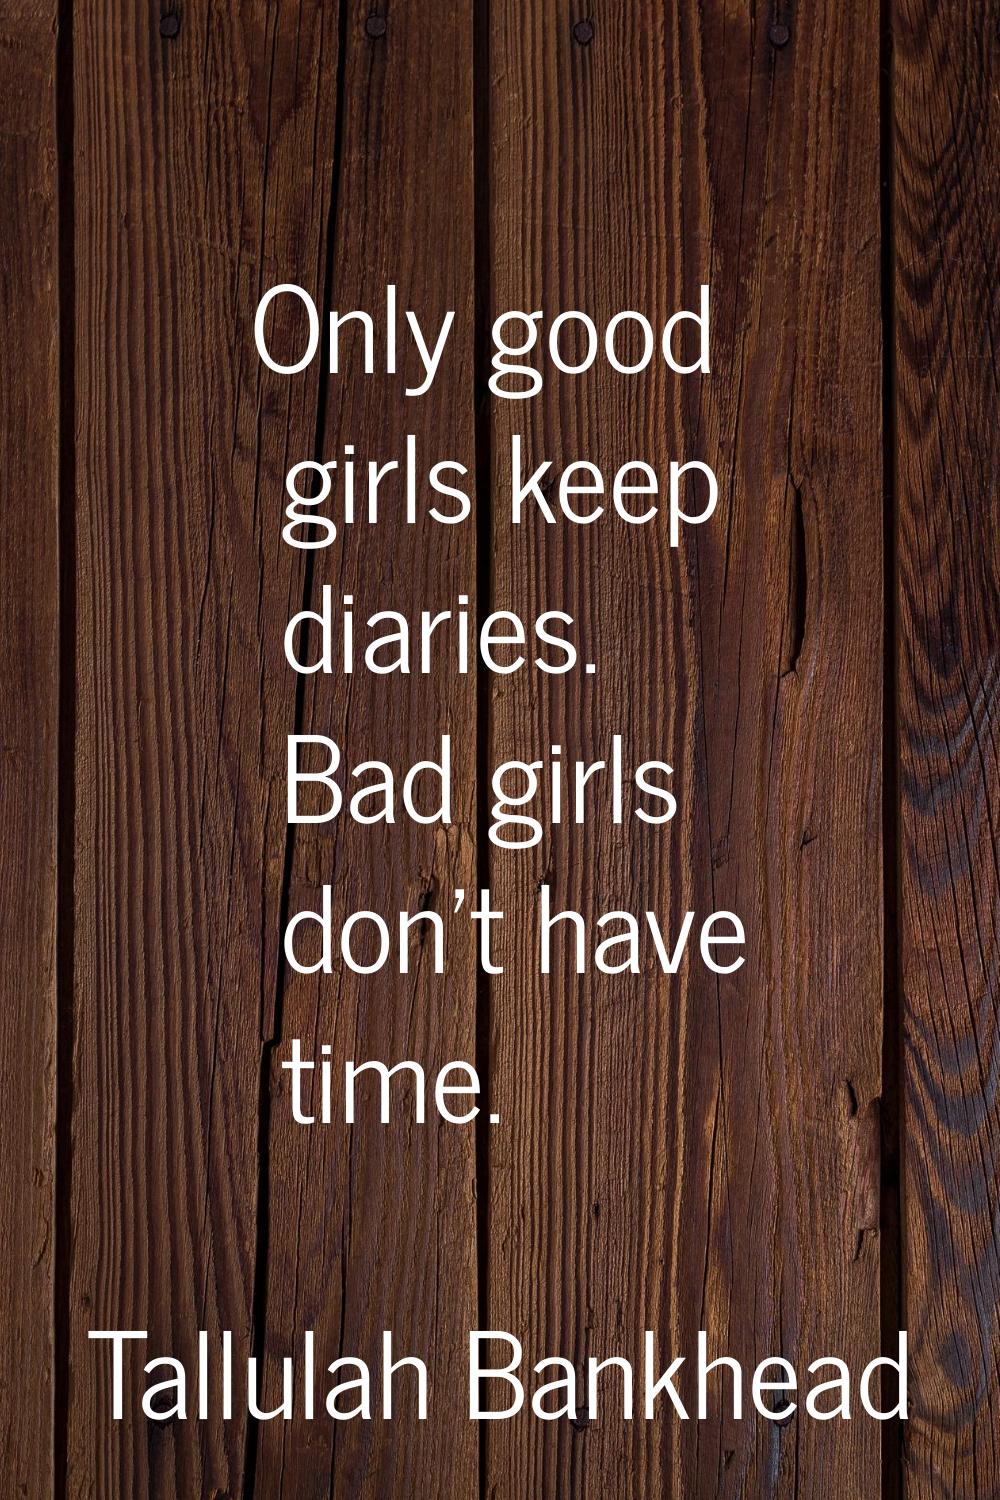 Only good girls keep diaries. Bad girls don't have time.